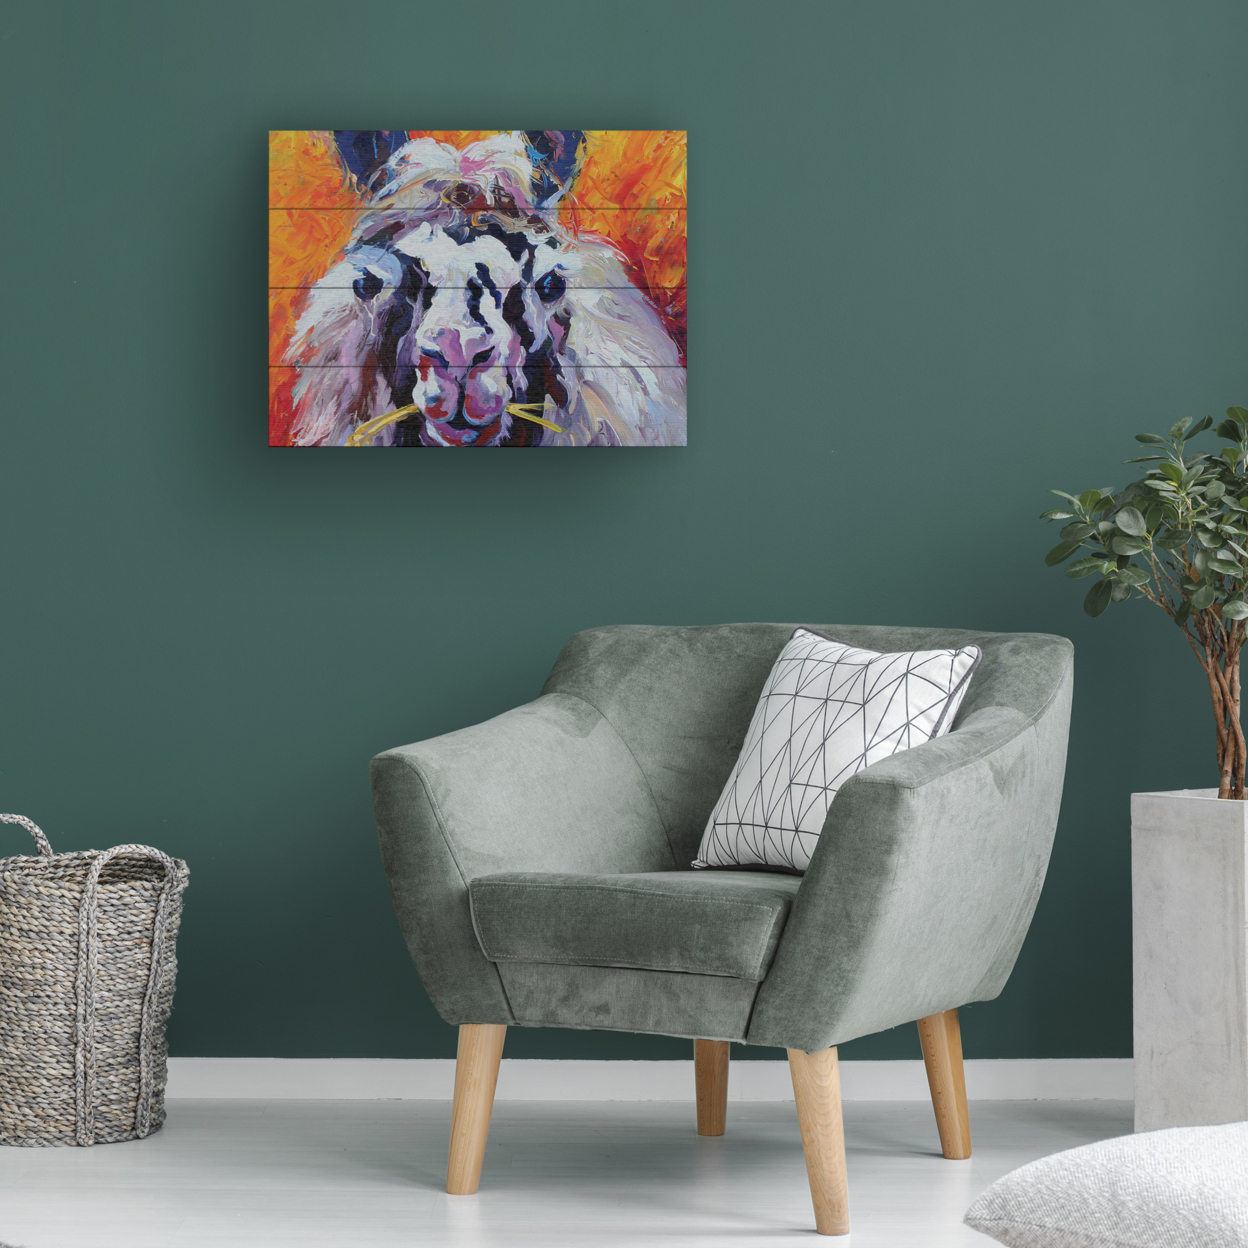 Wall Art 12 X 16 Inches Titled Llama III Ready To Hang Printed On Wooden Planks